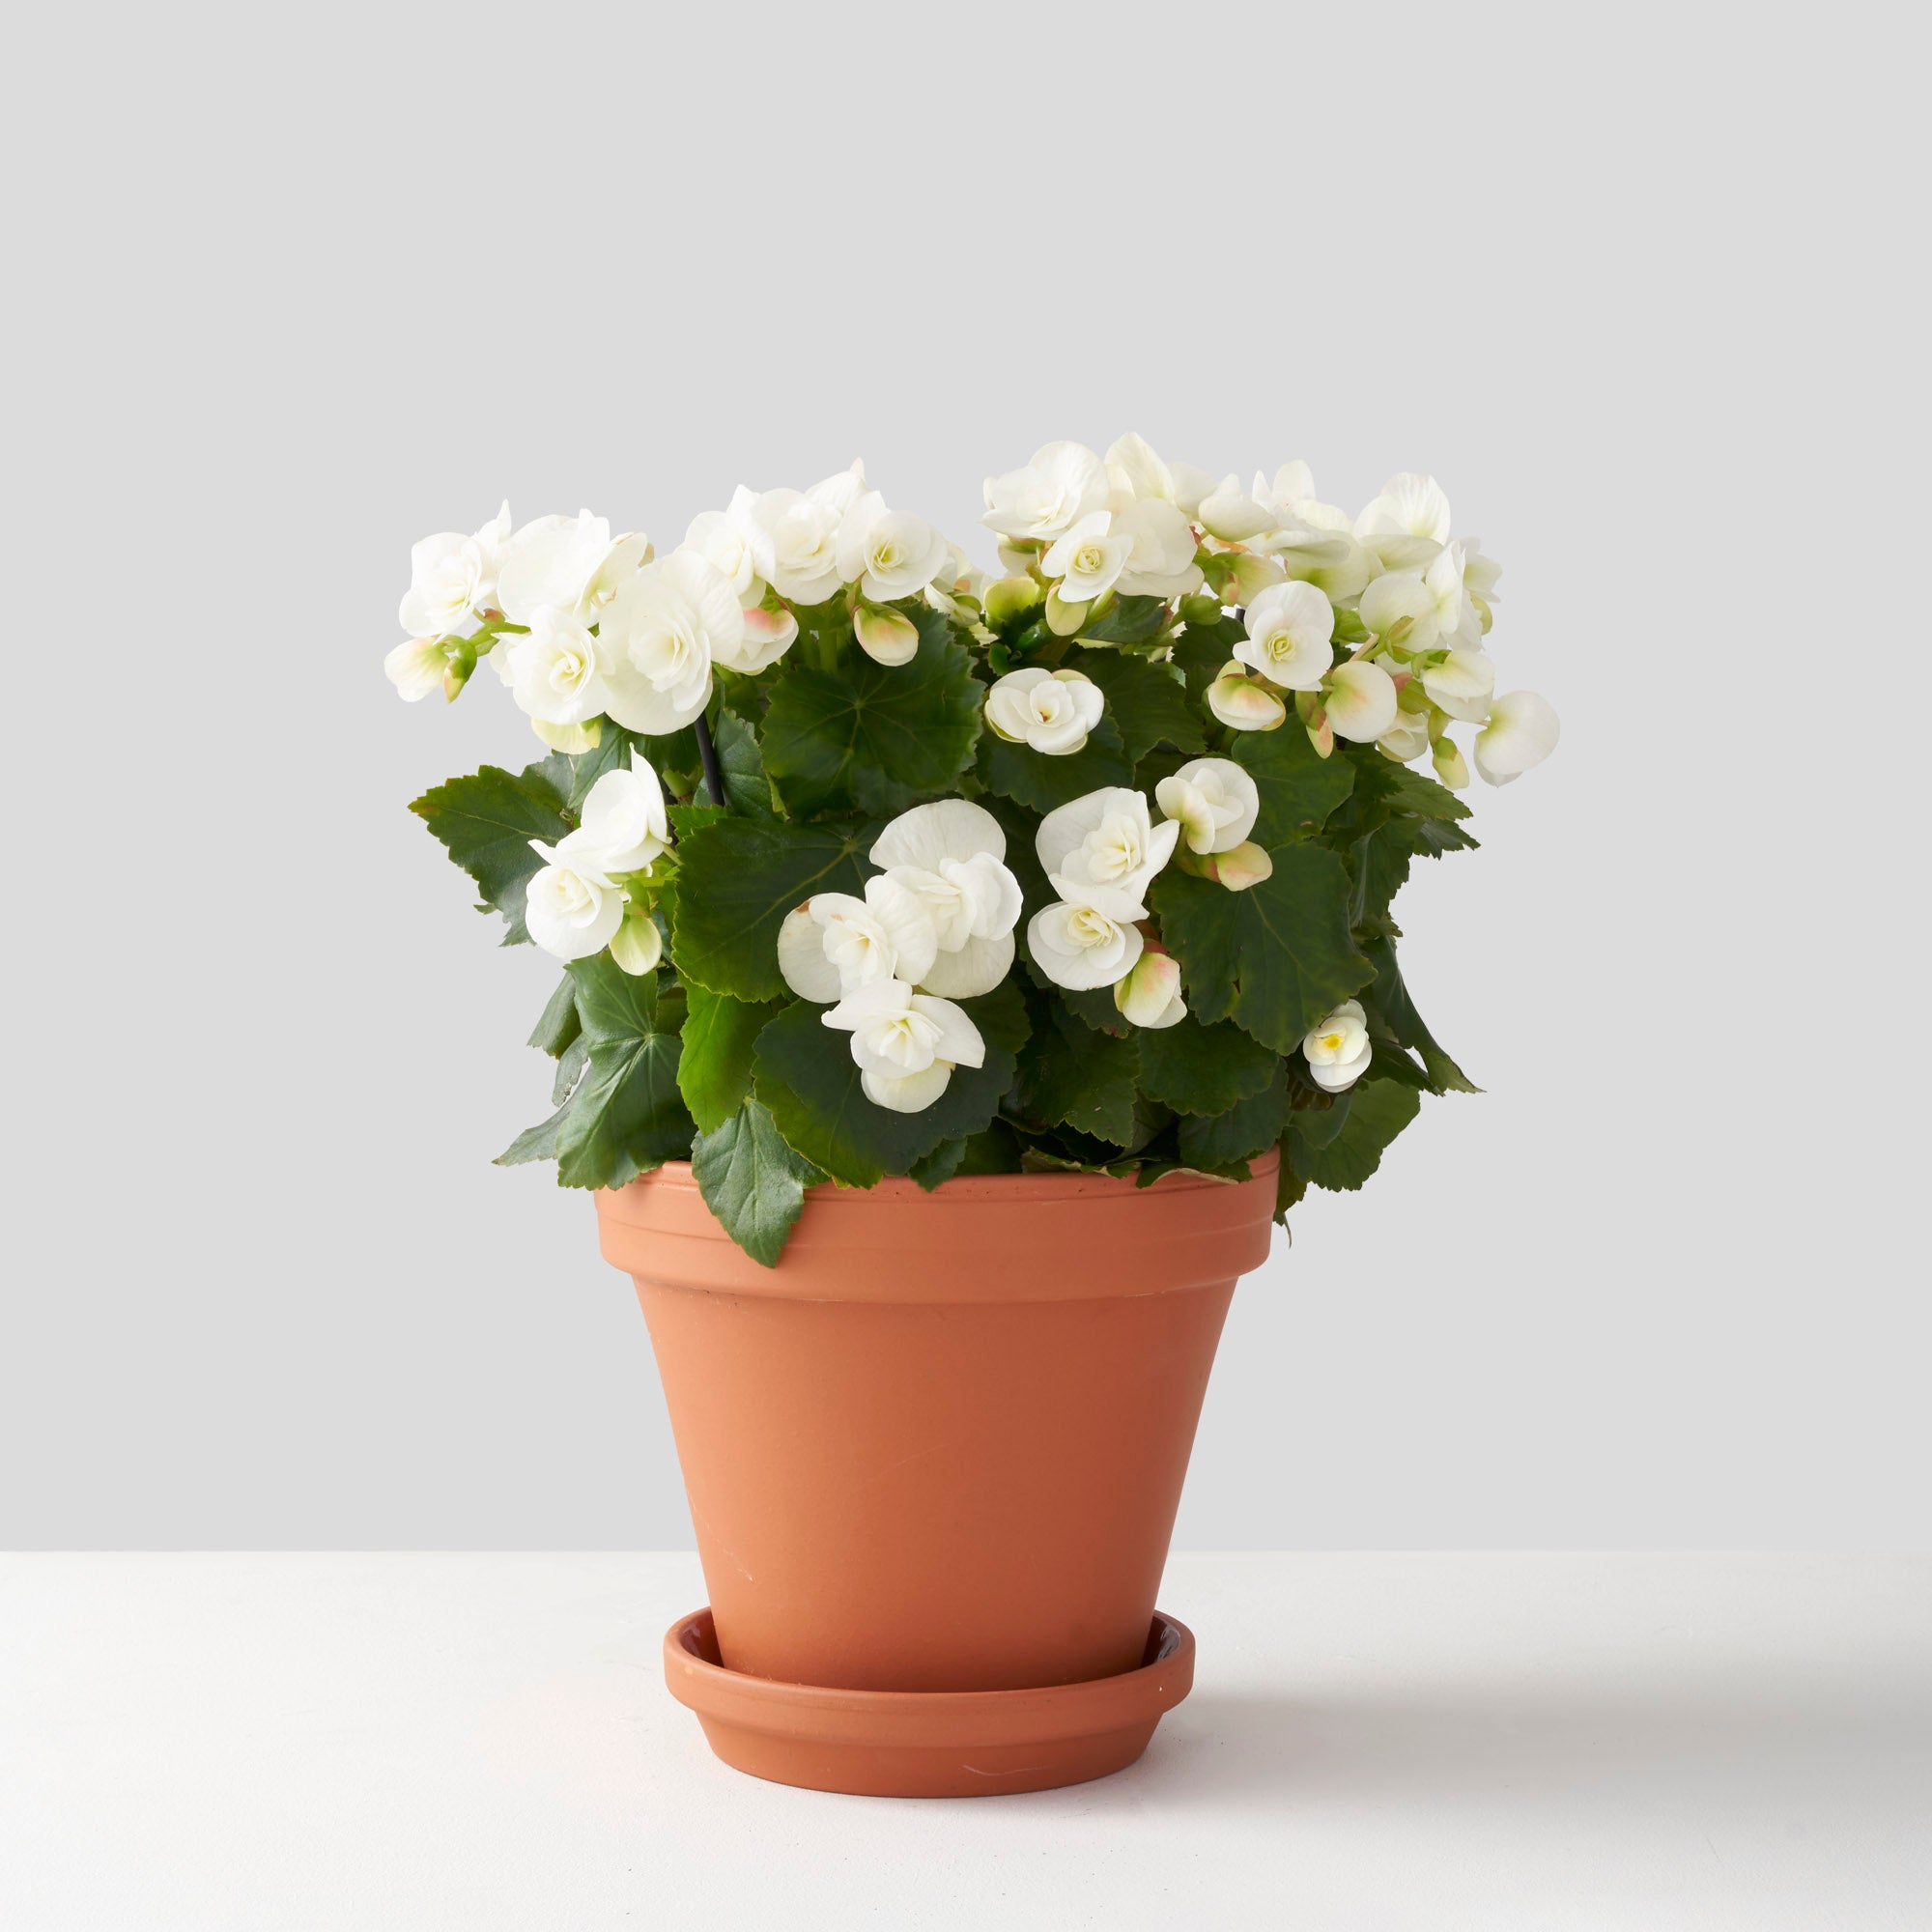 Flowering white begonia in clay pot on white background.